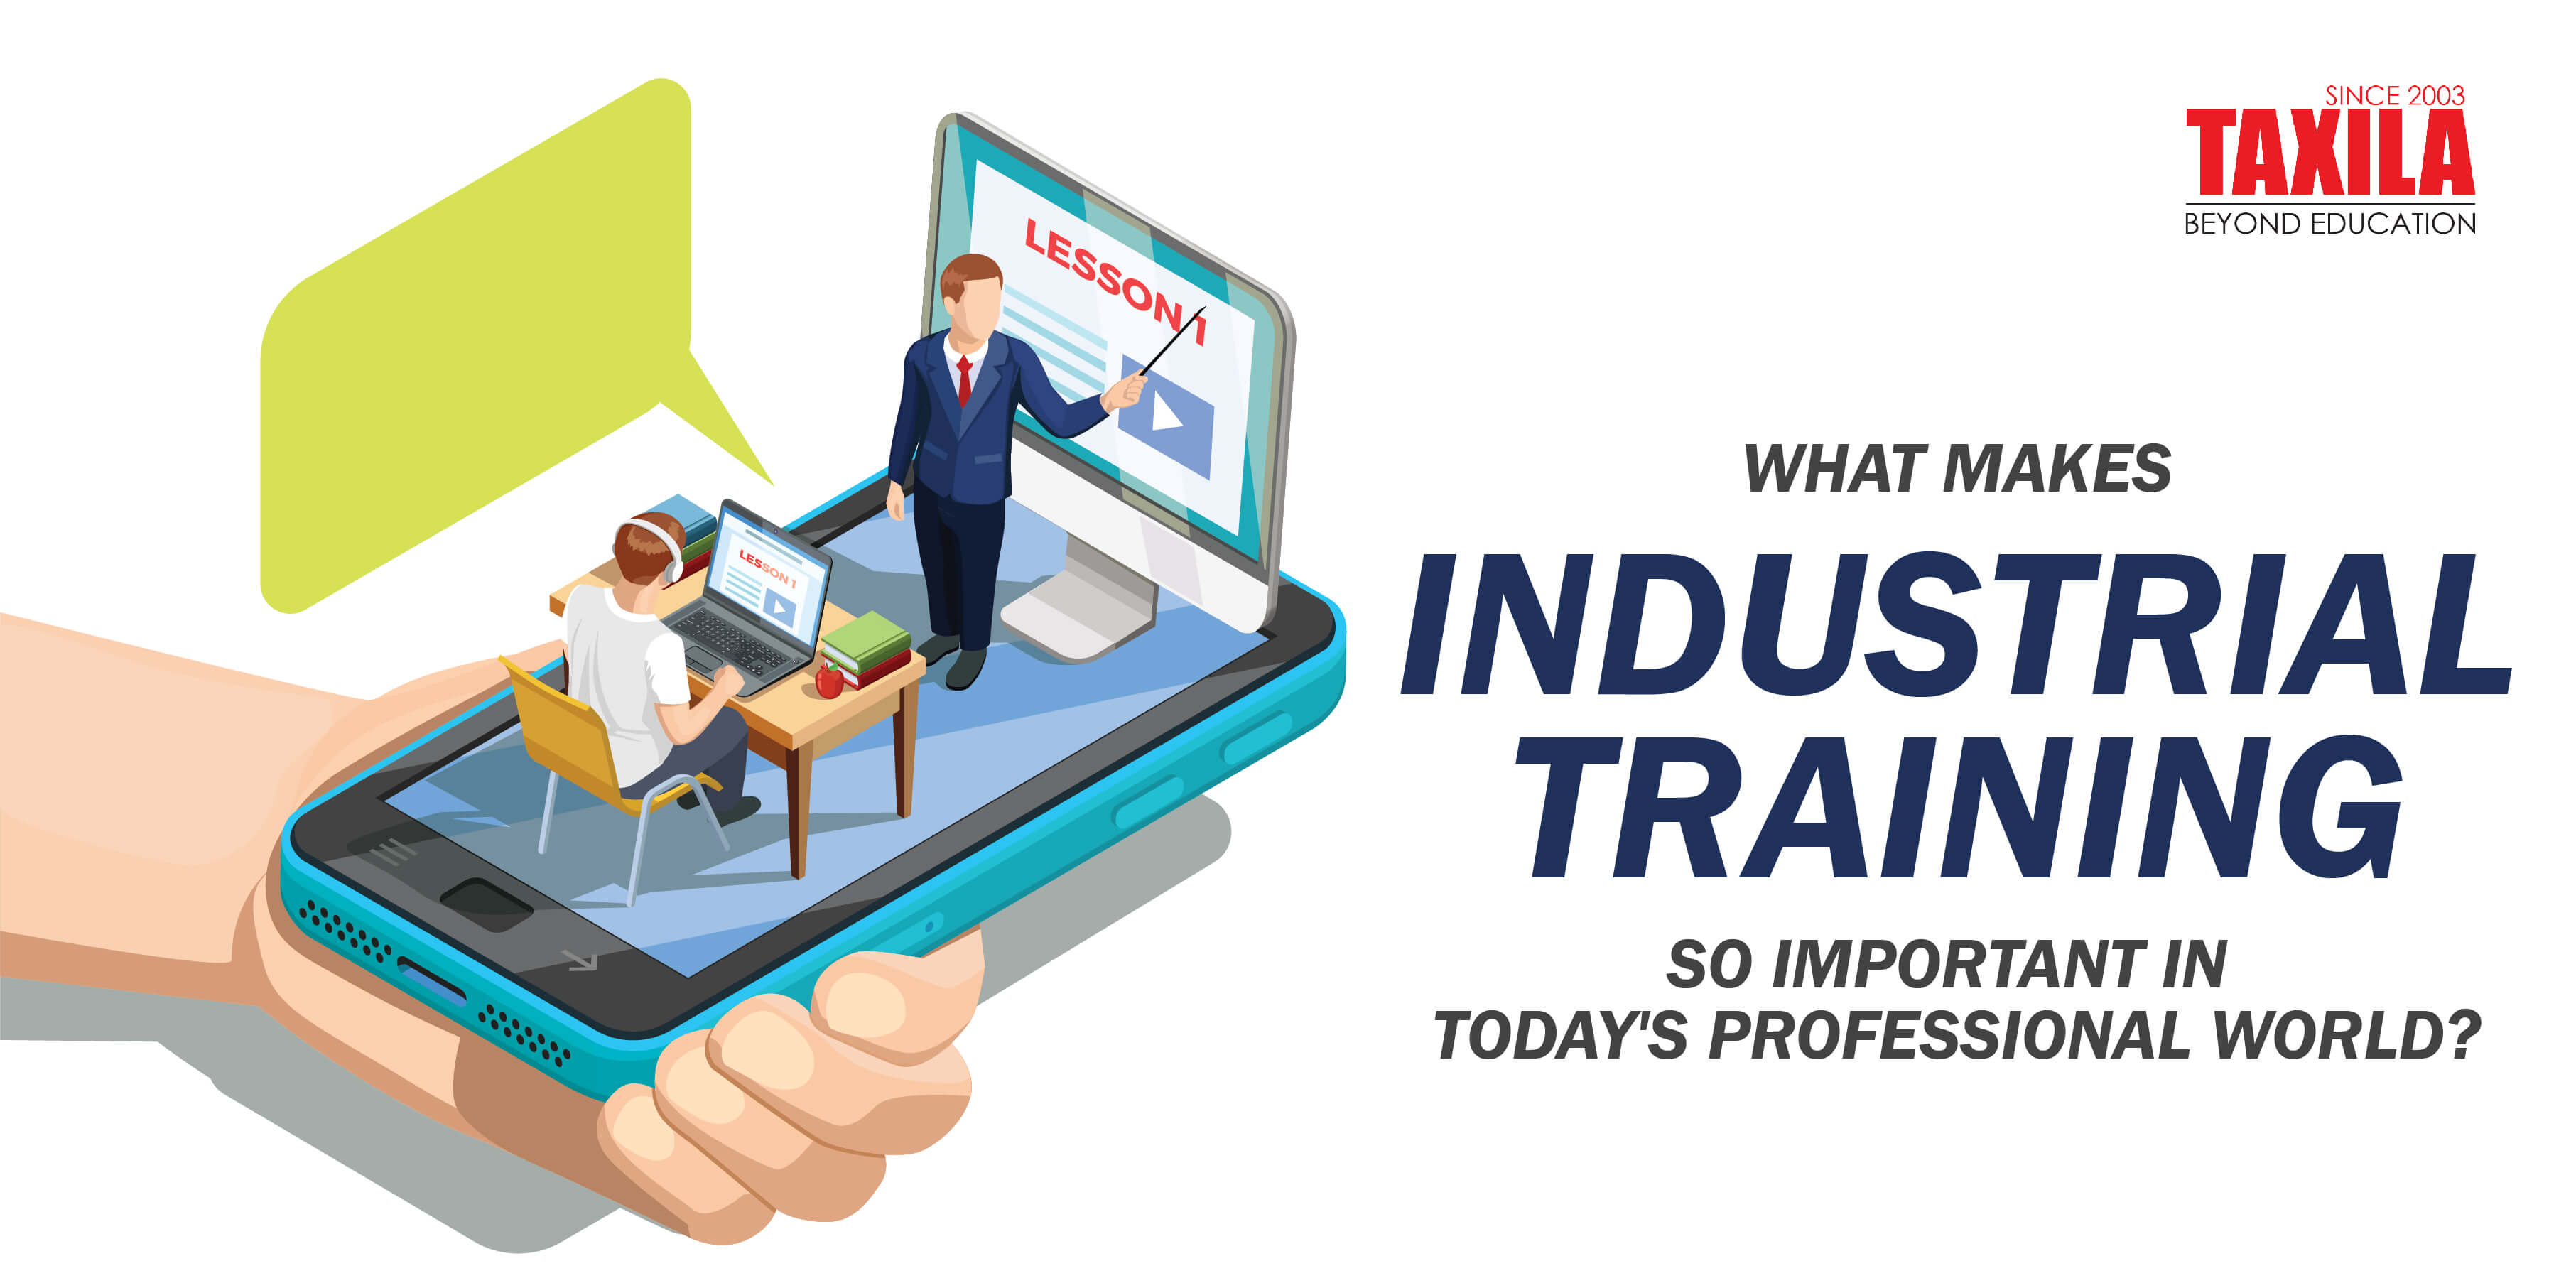 What makes industrial training so important